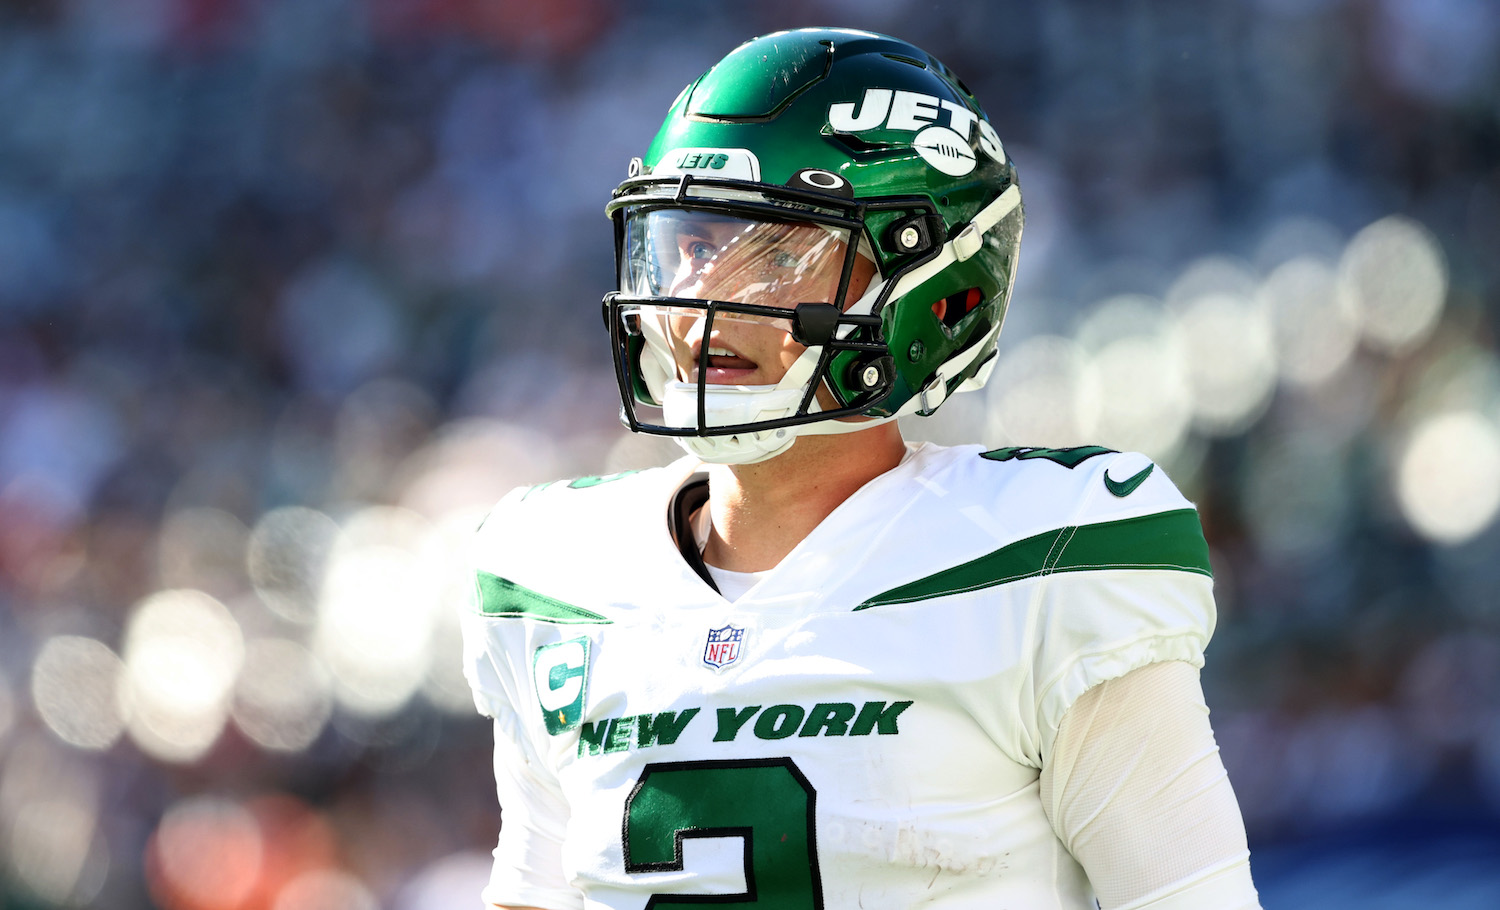 EAST RUTHERFORD, NEW JERSEY - SEPTEMBER 19: Quarterback Zach Wilson #2 of the New York Jets looks on during the fourth quarter against the New England Patriots at MetLife Stadium on September 19, 2021 in East Rutherford, New Jersey. (Photo by Elsa/Getty Images)